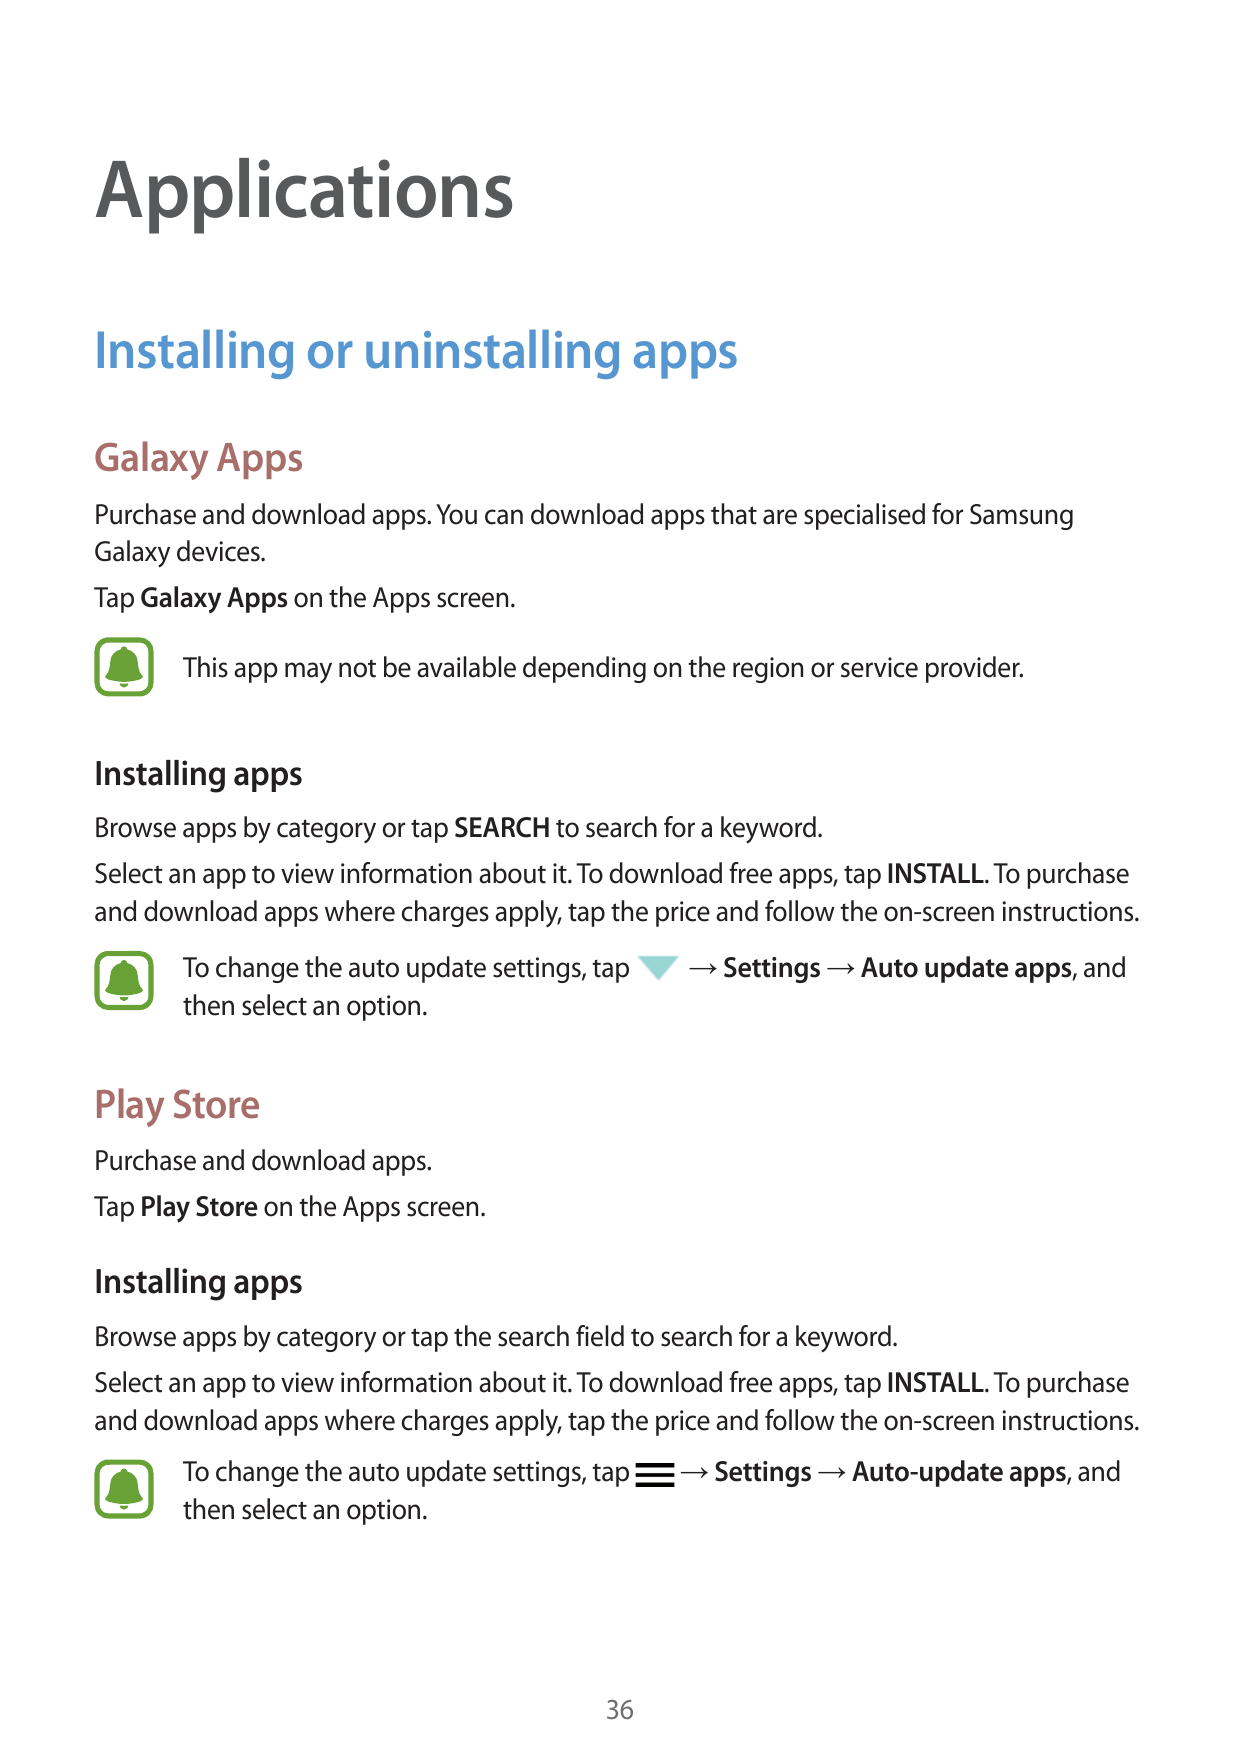 ApplicationsInstalling or uninstalling appsGalaxy AppsPurchase and download apps. You can download apps that are specialised for